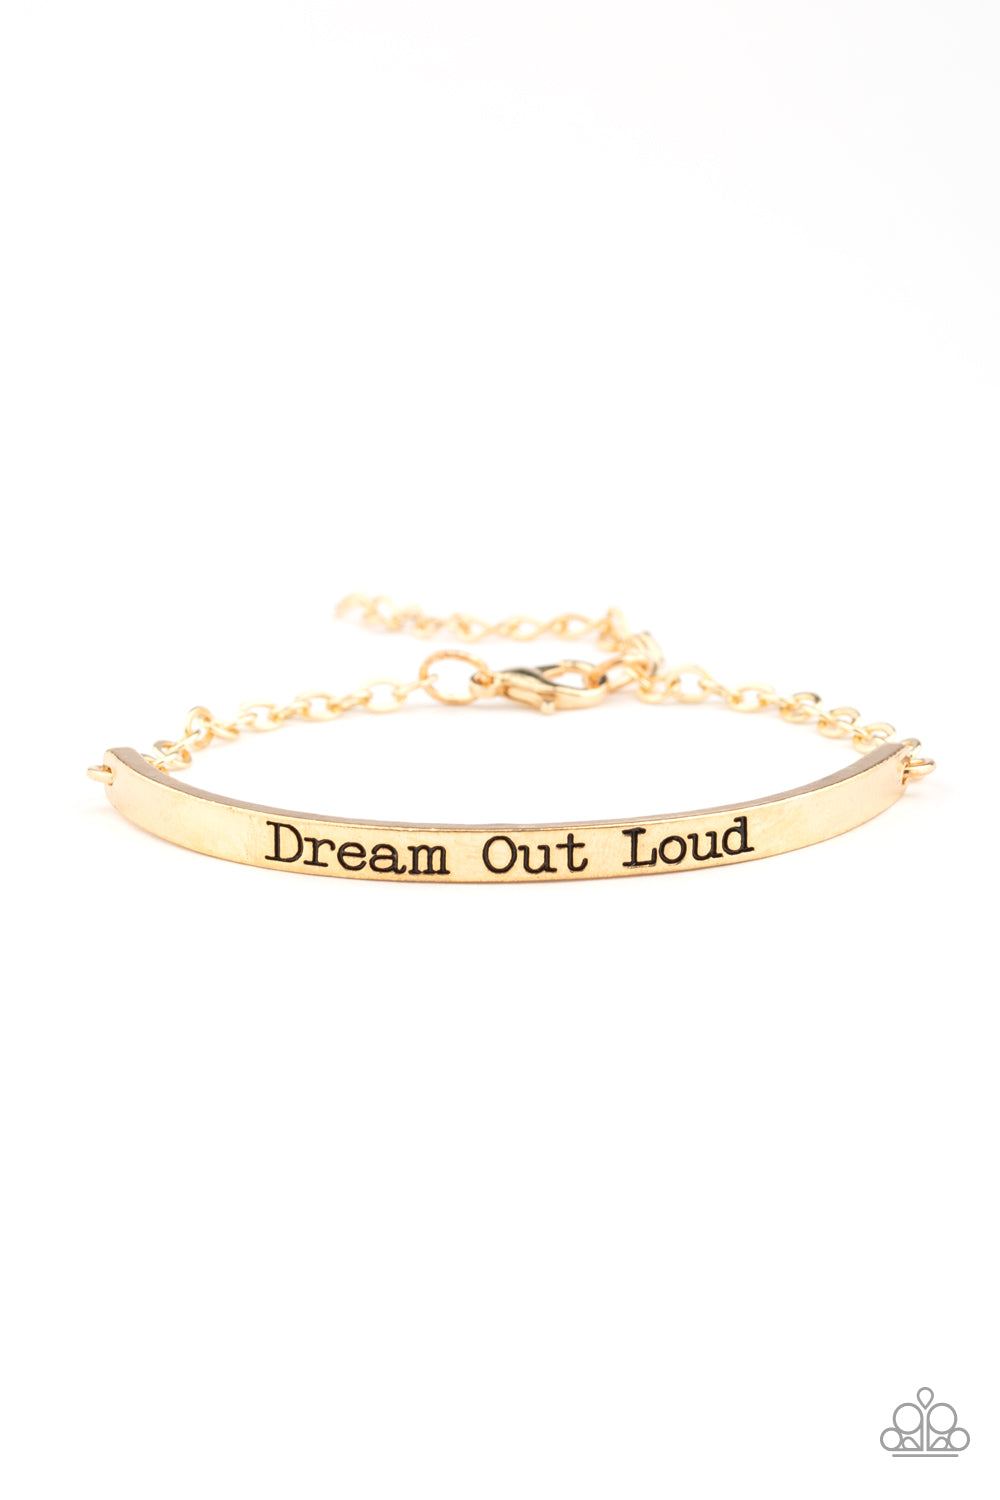 dream-out-loud-gold-p9wd-gdxx-147xx